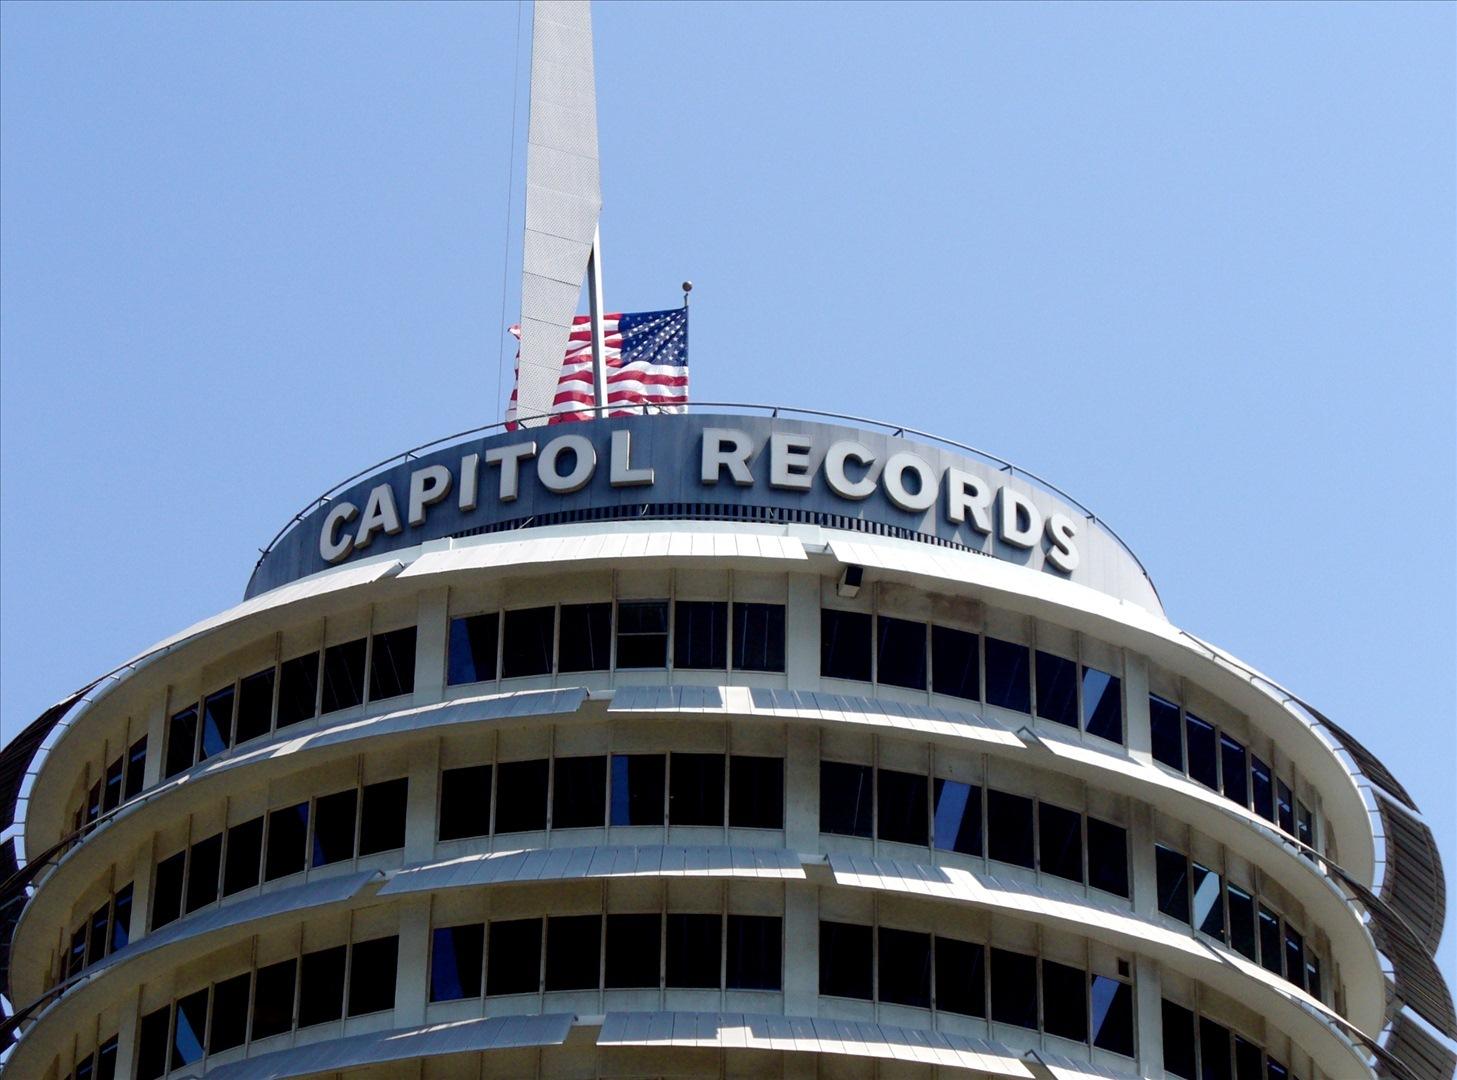 REDONE, CAPITOL RECORDS AND THE MAINSTREAM’S ABSOLUTE ACK...